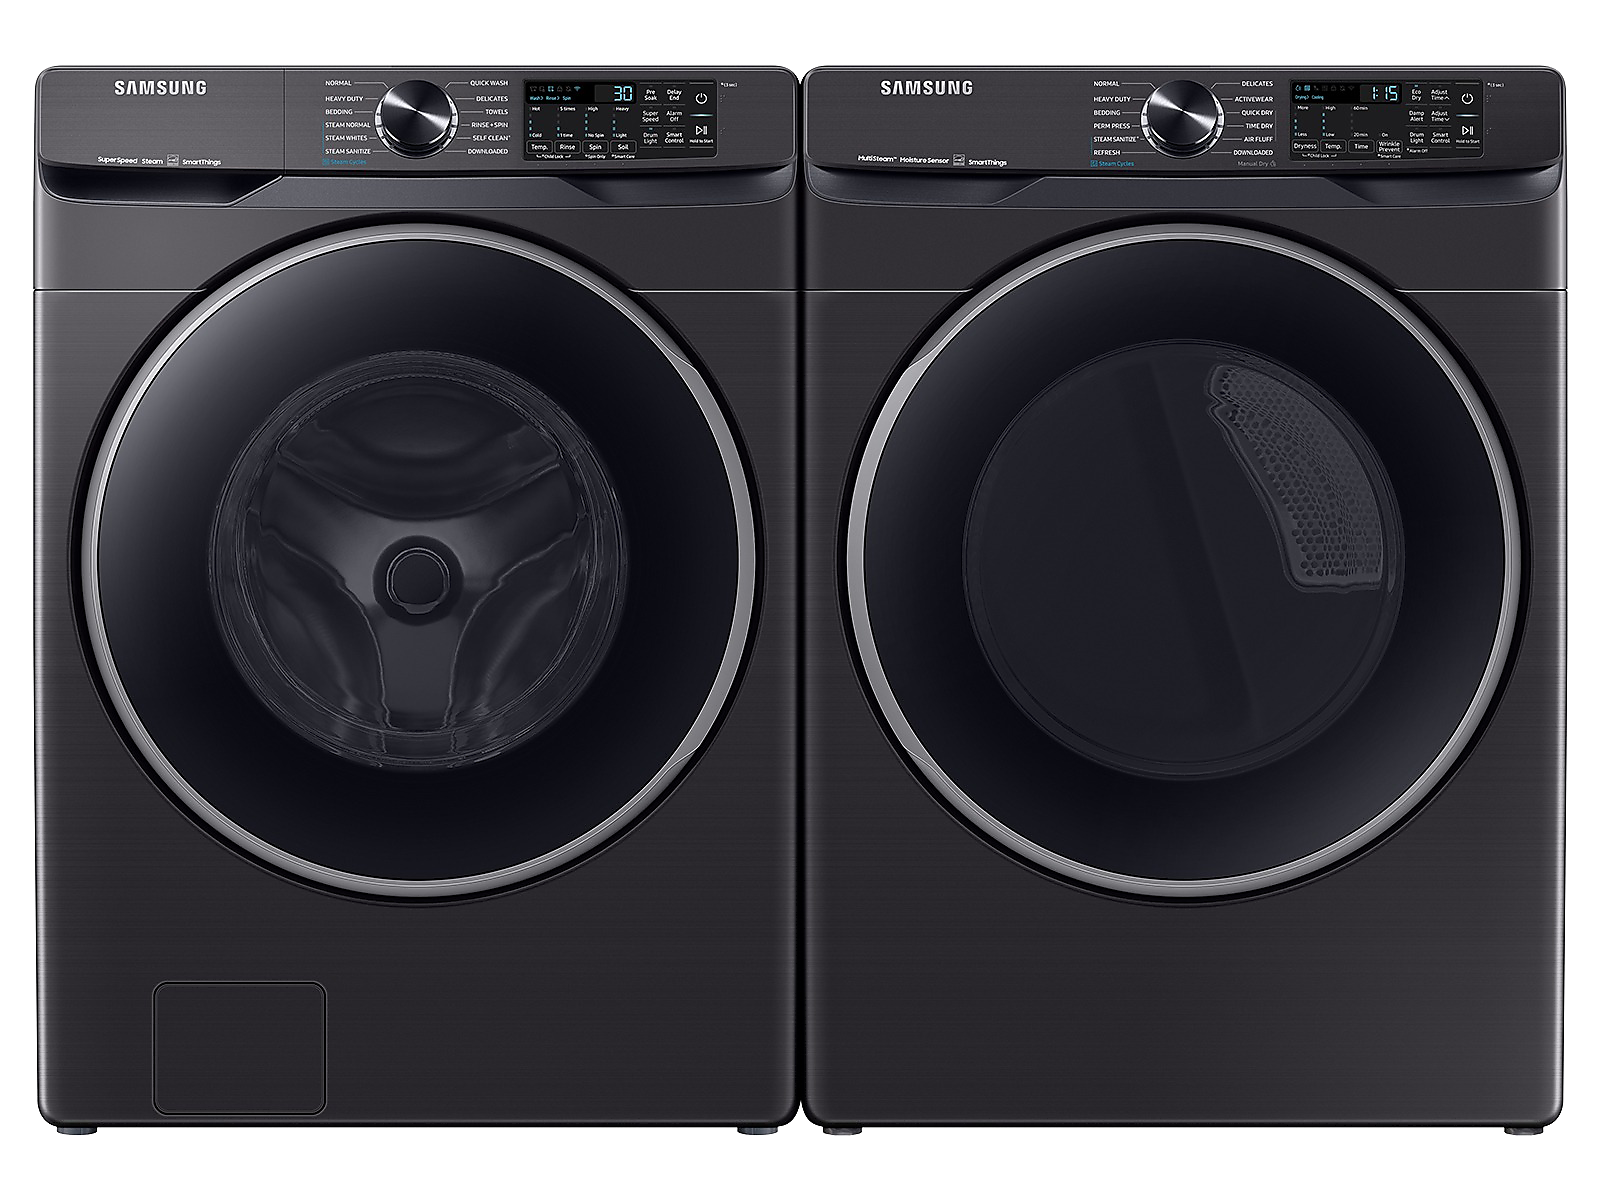 Samsung Smart Front Load Super Speed Wash Washer and Smart Steam Sanitize+ Electric Dryer package in Brushed in Black(BNDL-1646290778206) photo